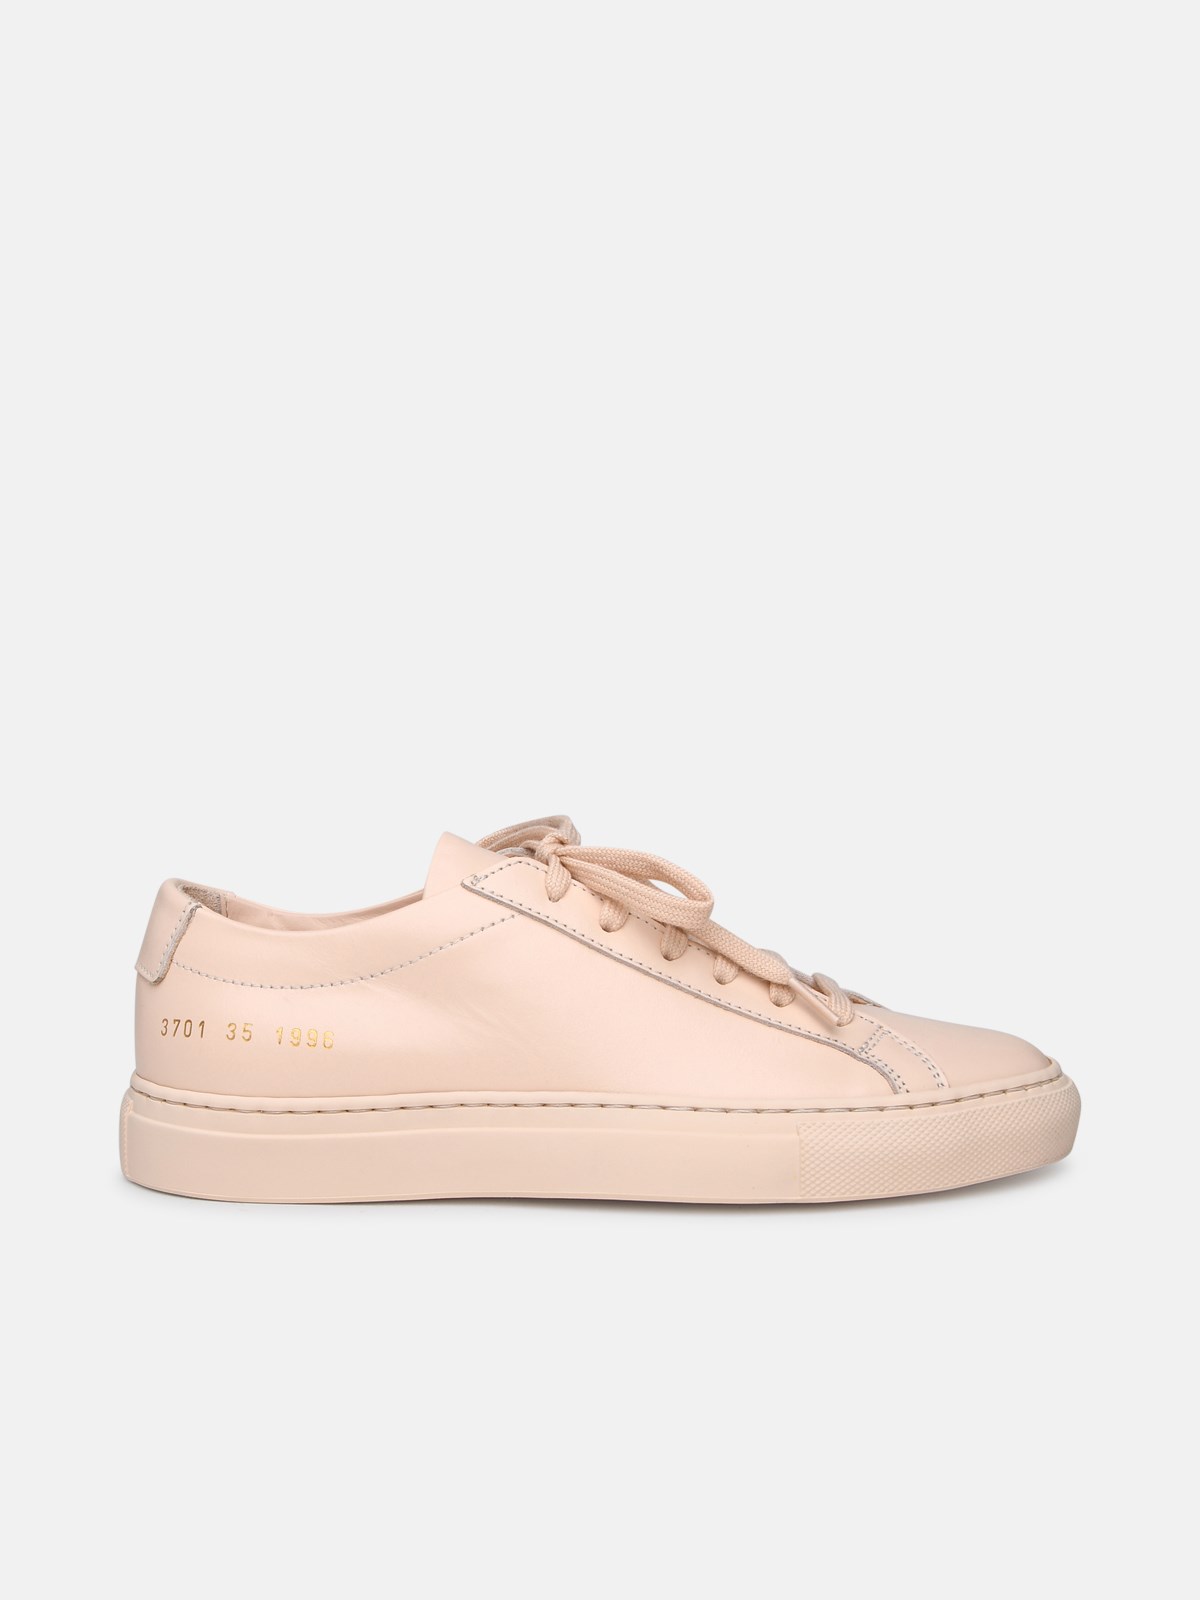 Common Projects Pink Leather Achilles Sneakers